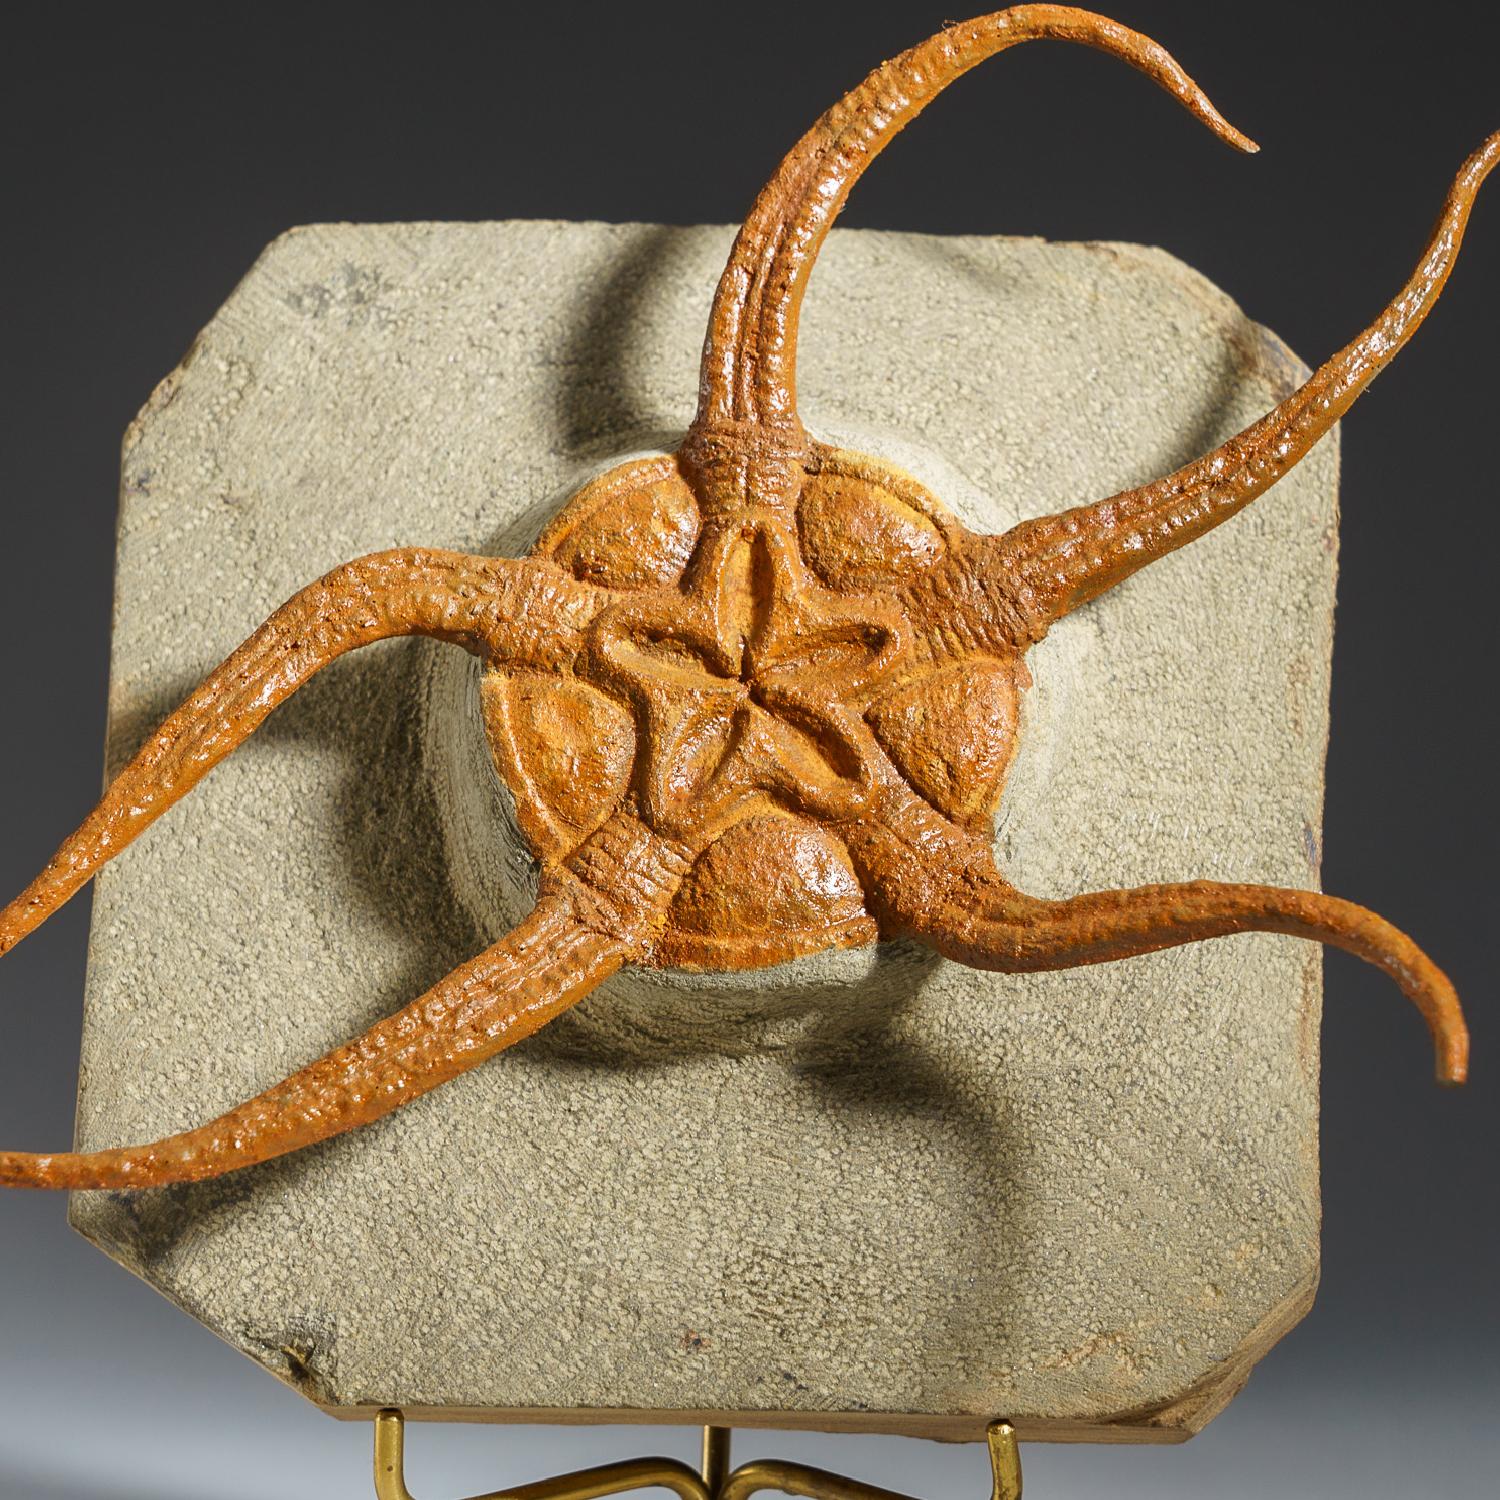 18th Century and Earlier Genuine Ophiuroidea Brittle Star Fossil with Customized Display Stand (1.8 lbs) For Sale